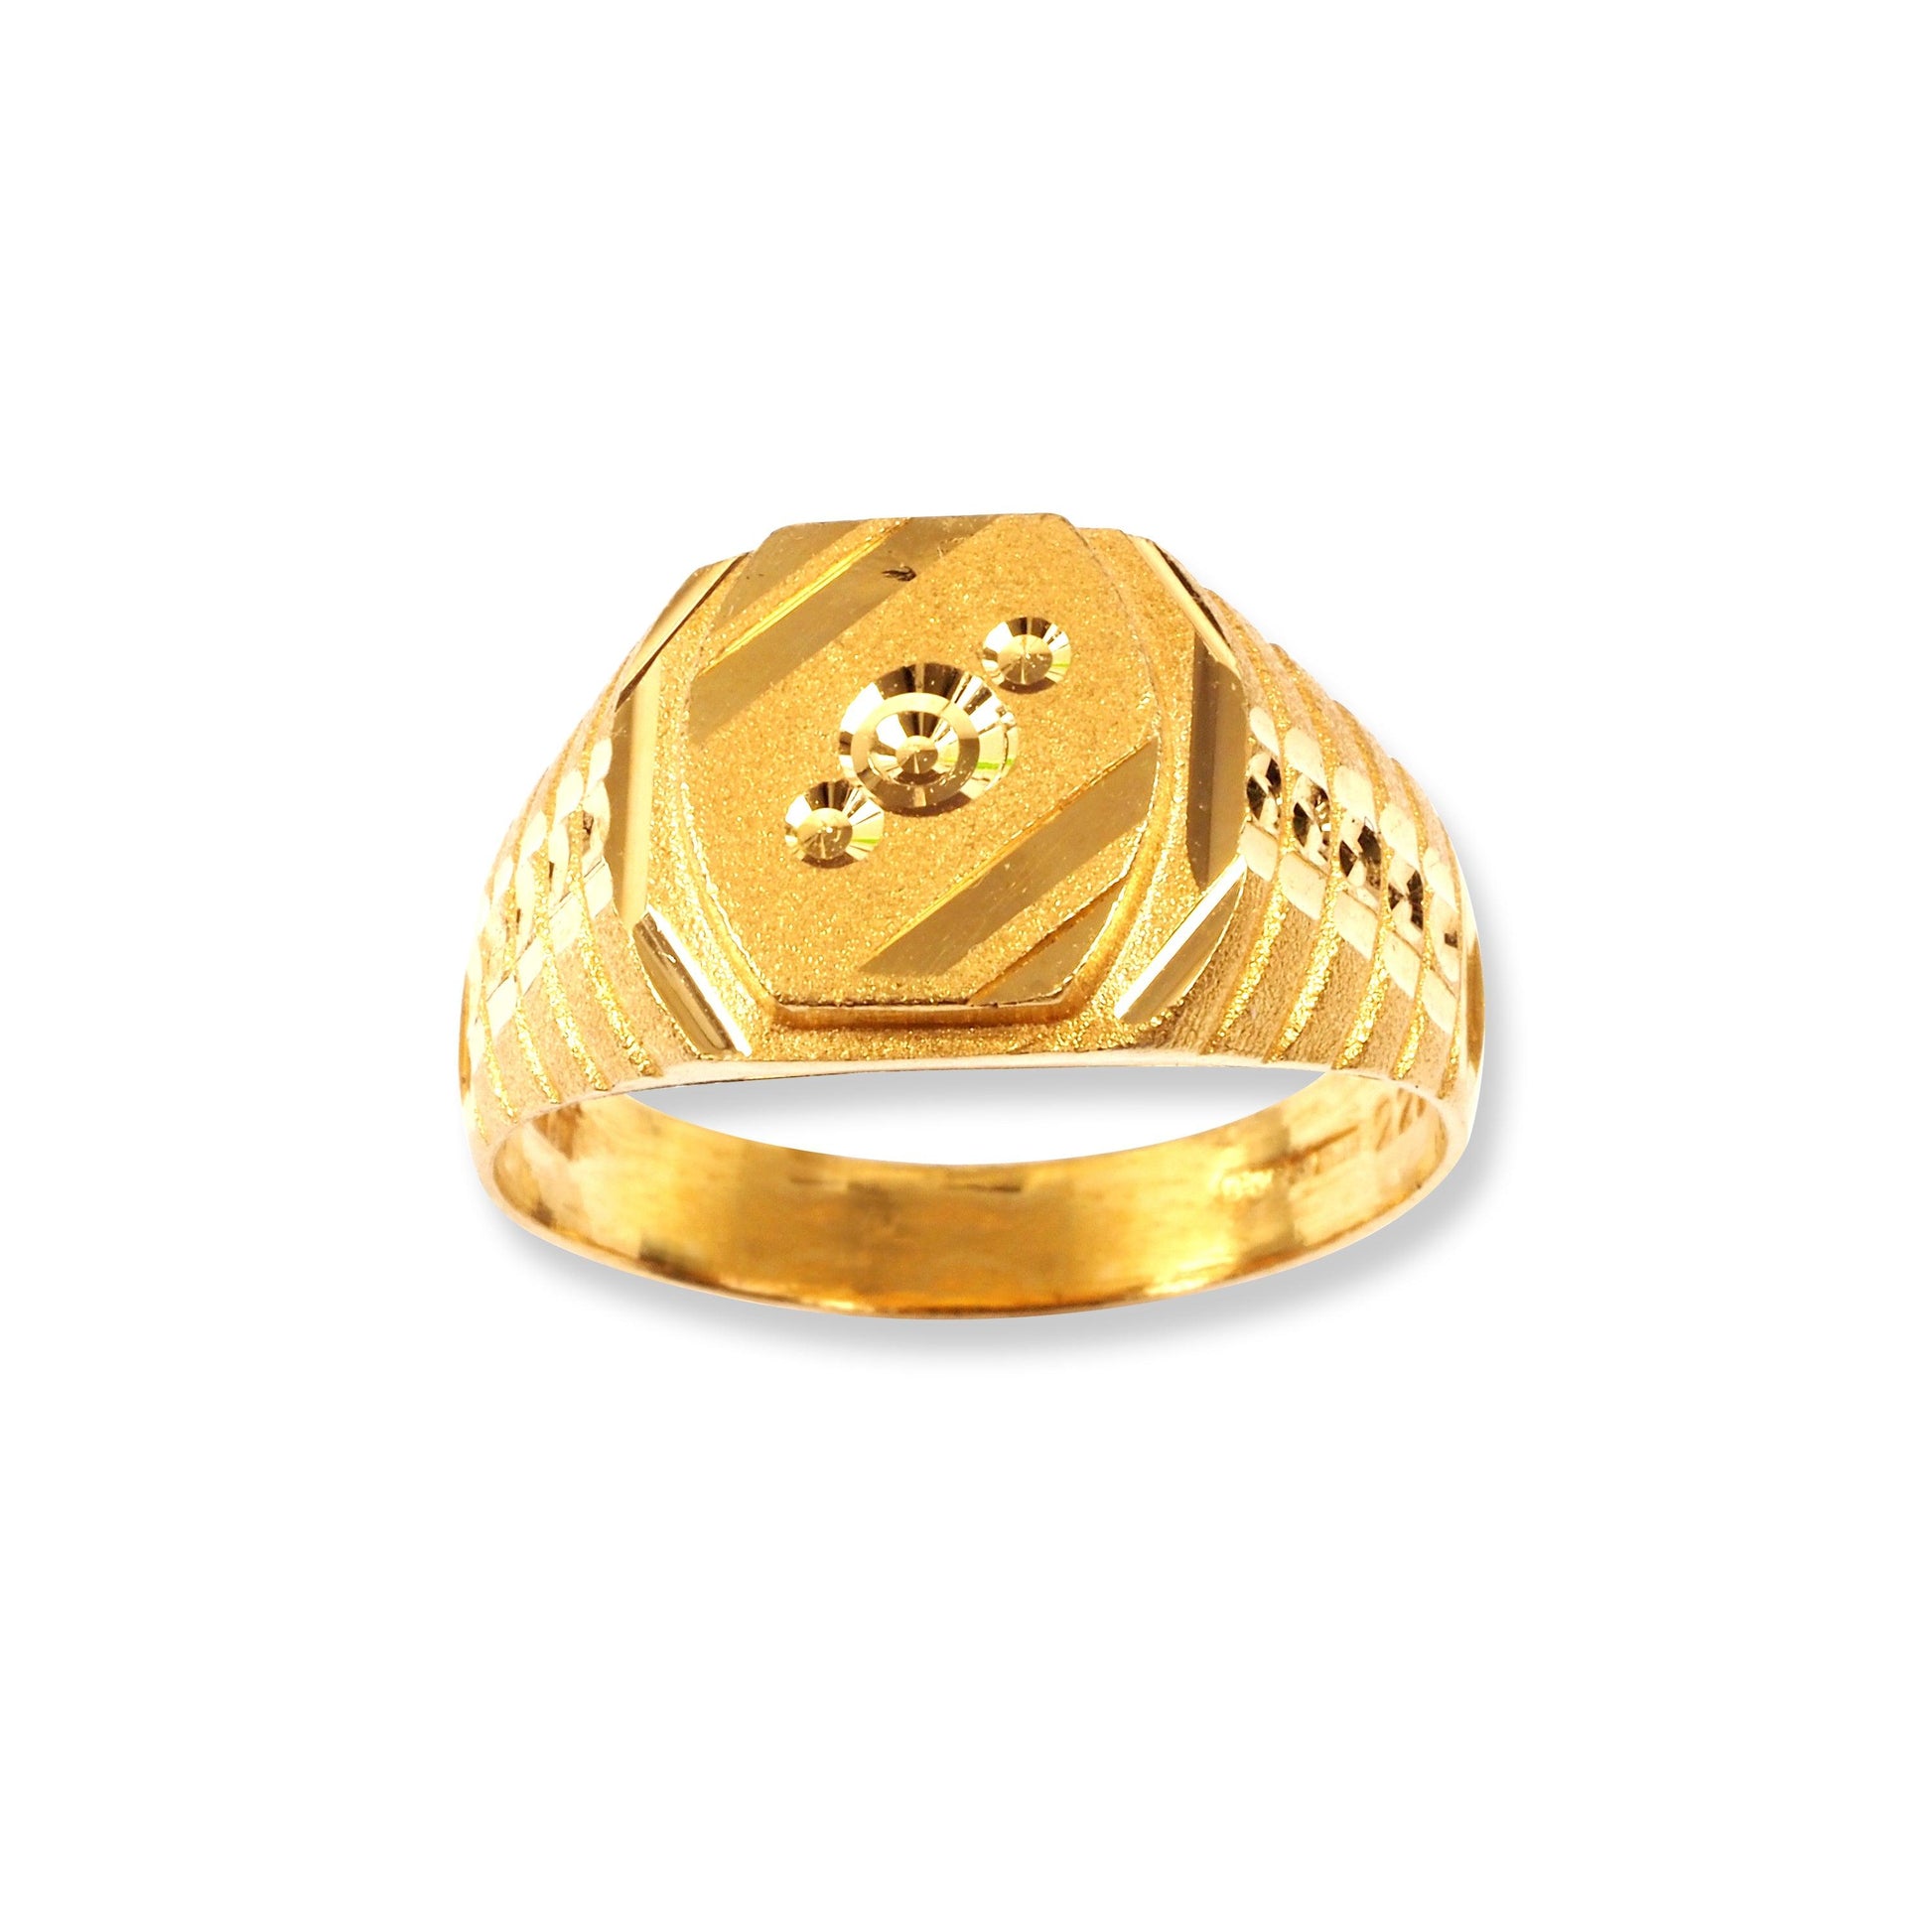 22ct Gold Gents Signet Ring GBR-8320 - Minar Jewellers